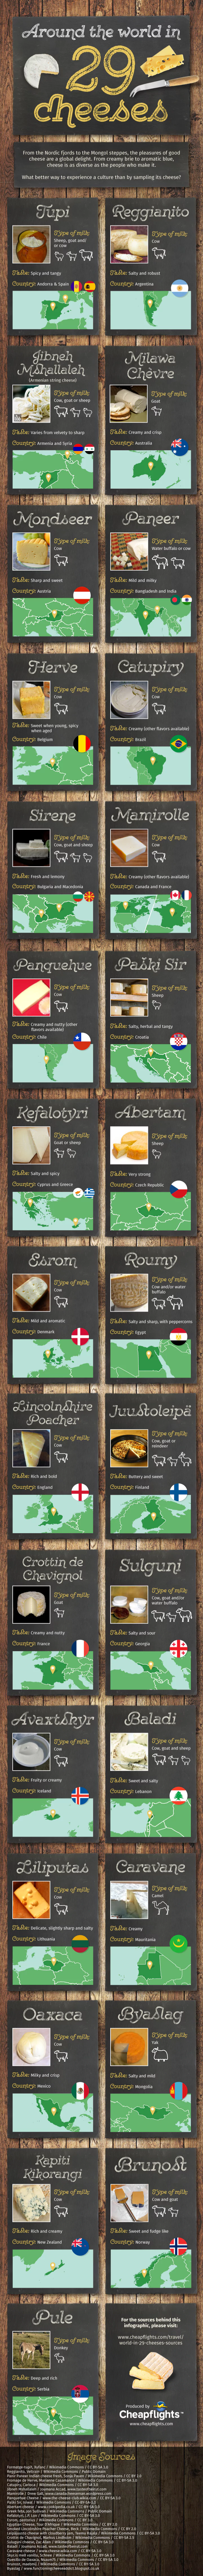 Around the World in 29 Cheeses